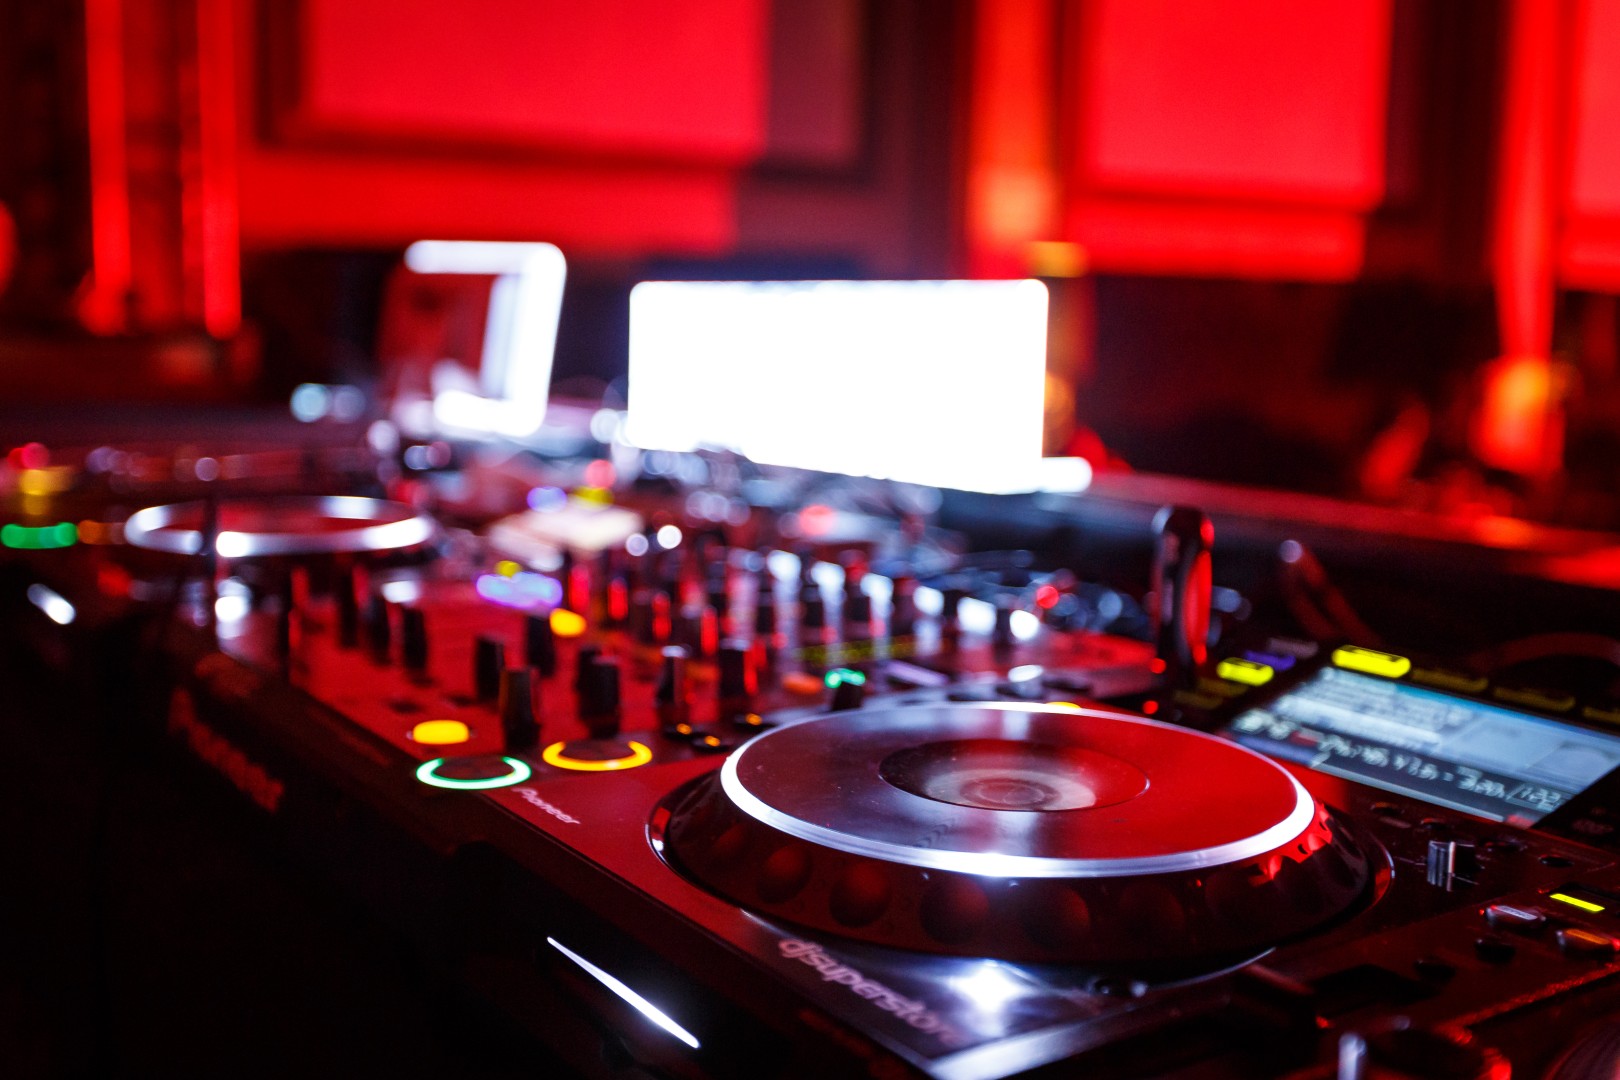 Mixer Console at Kristal Club in Bucharest on January 9, 2016 (3ea2a28f83)